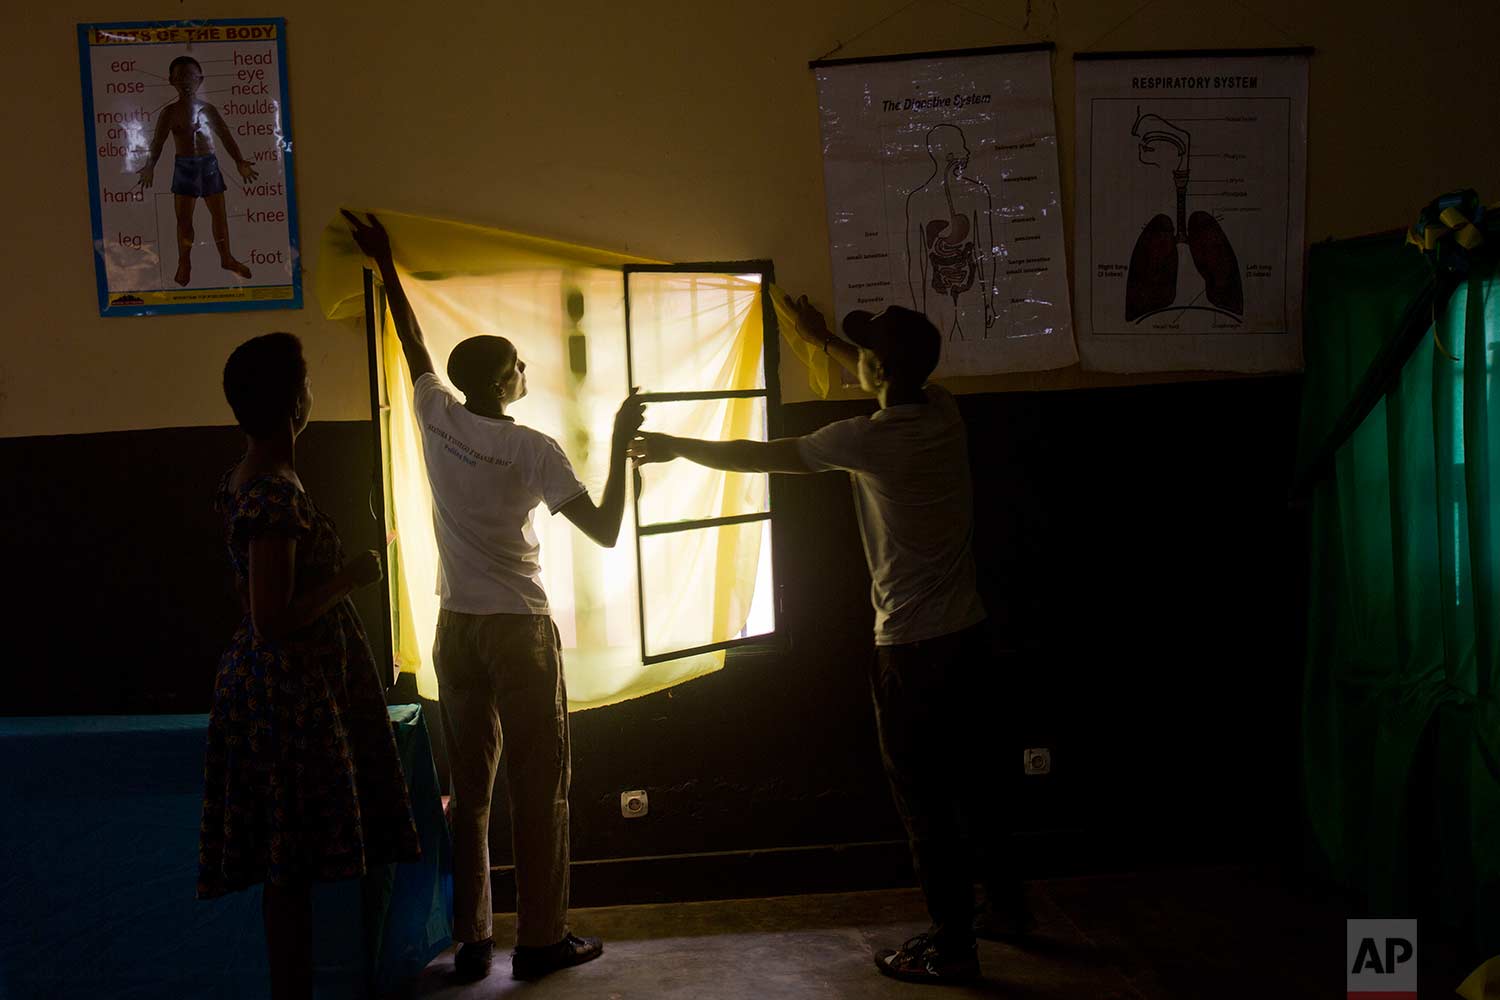  Election volunteers prepare a polling station in Rwanda's capital Kigali, Thursday Aug. 3, 2017, in preparation for Friday's presidential elections. (AP Photo/Jerome Delay) 